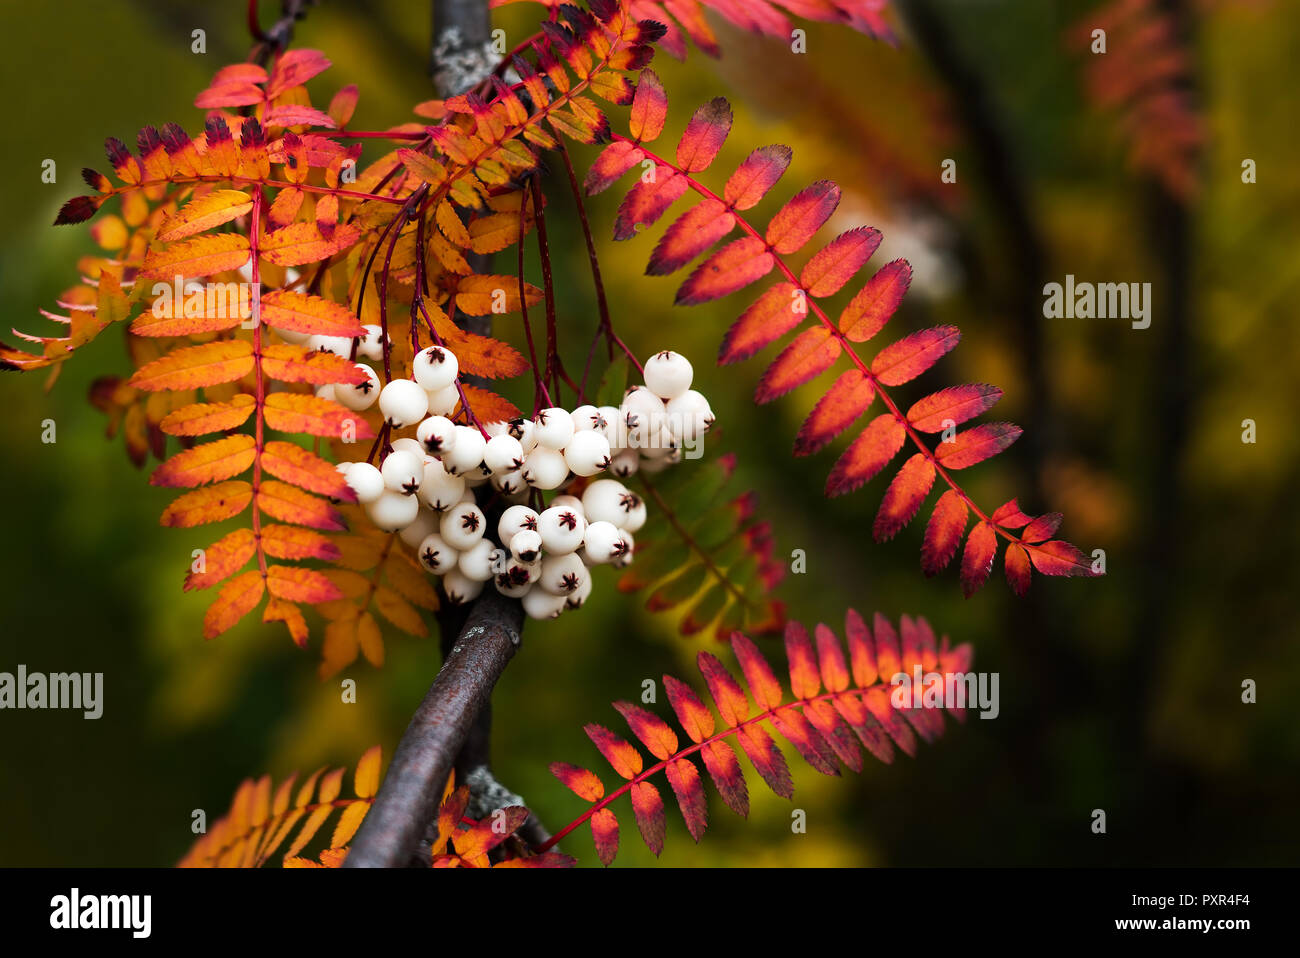 Close up of vibrant colorful autumn leaves from Koehne mountain ash, White Fruited Chinese,Rowan Sorbus koehneana, with many white berries Stock Photo